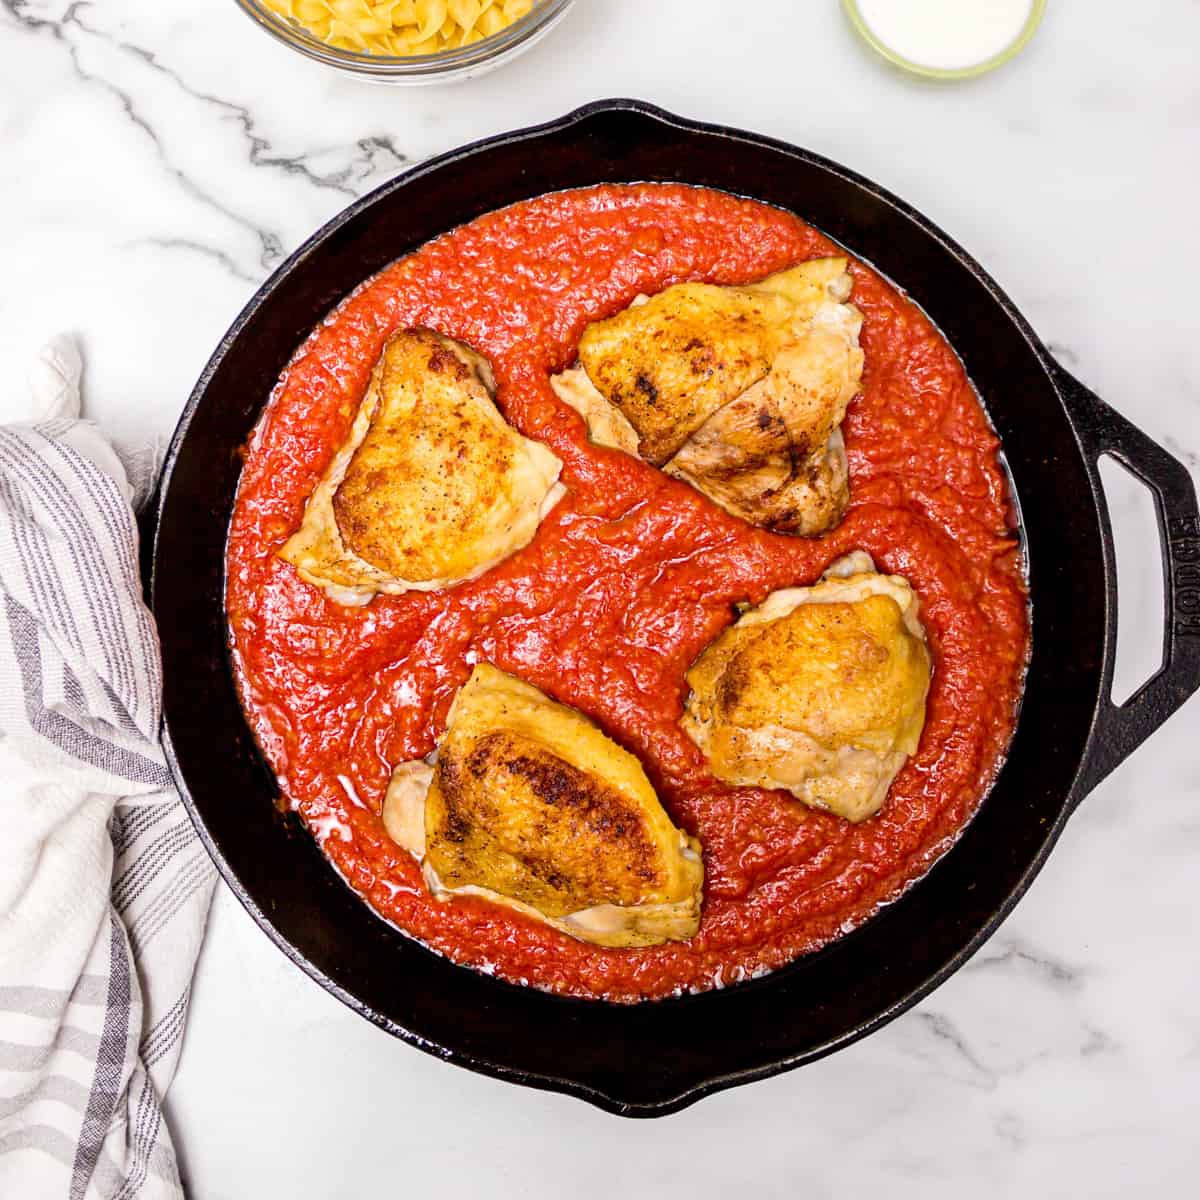 Tomato sauce and chicken cooking in skillet.